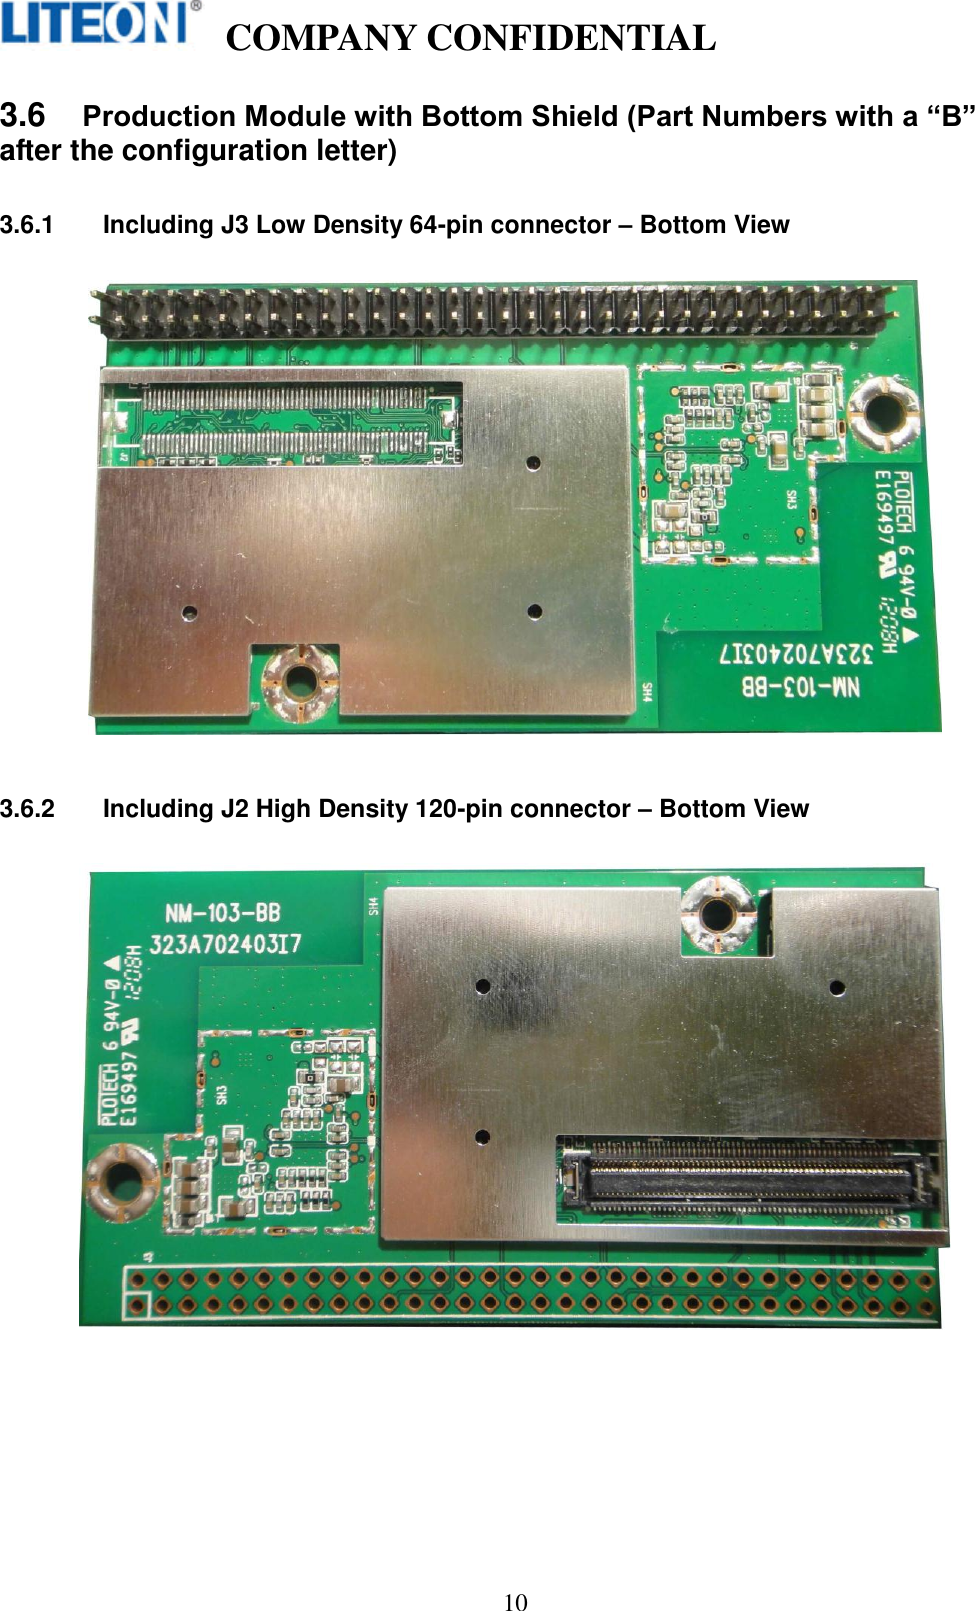   COMPANY CONFIDENTIAL    10 3.6 Production Module with Bottom Shield (Part Numbers with a “B” after the configuration letter) 3.6.1  Including J3 Low Density 64-pin connector – Bottom View    3.6.2  Including J2 High Density 120-pin connector – Bottom View    